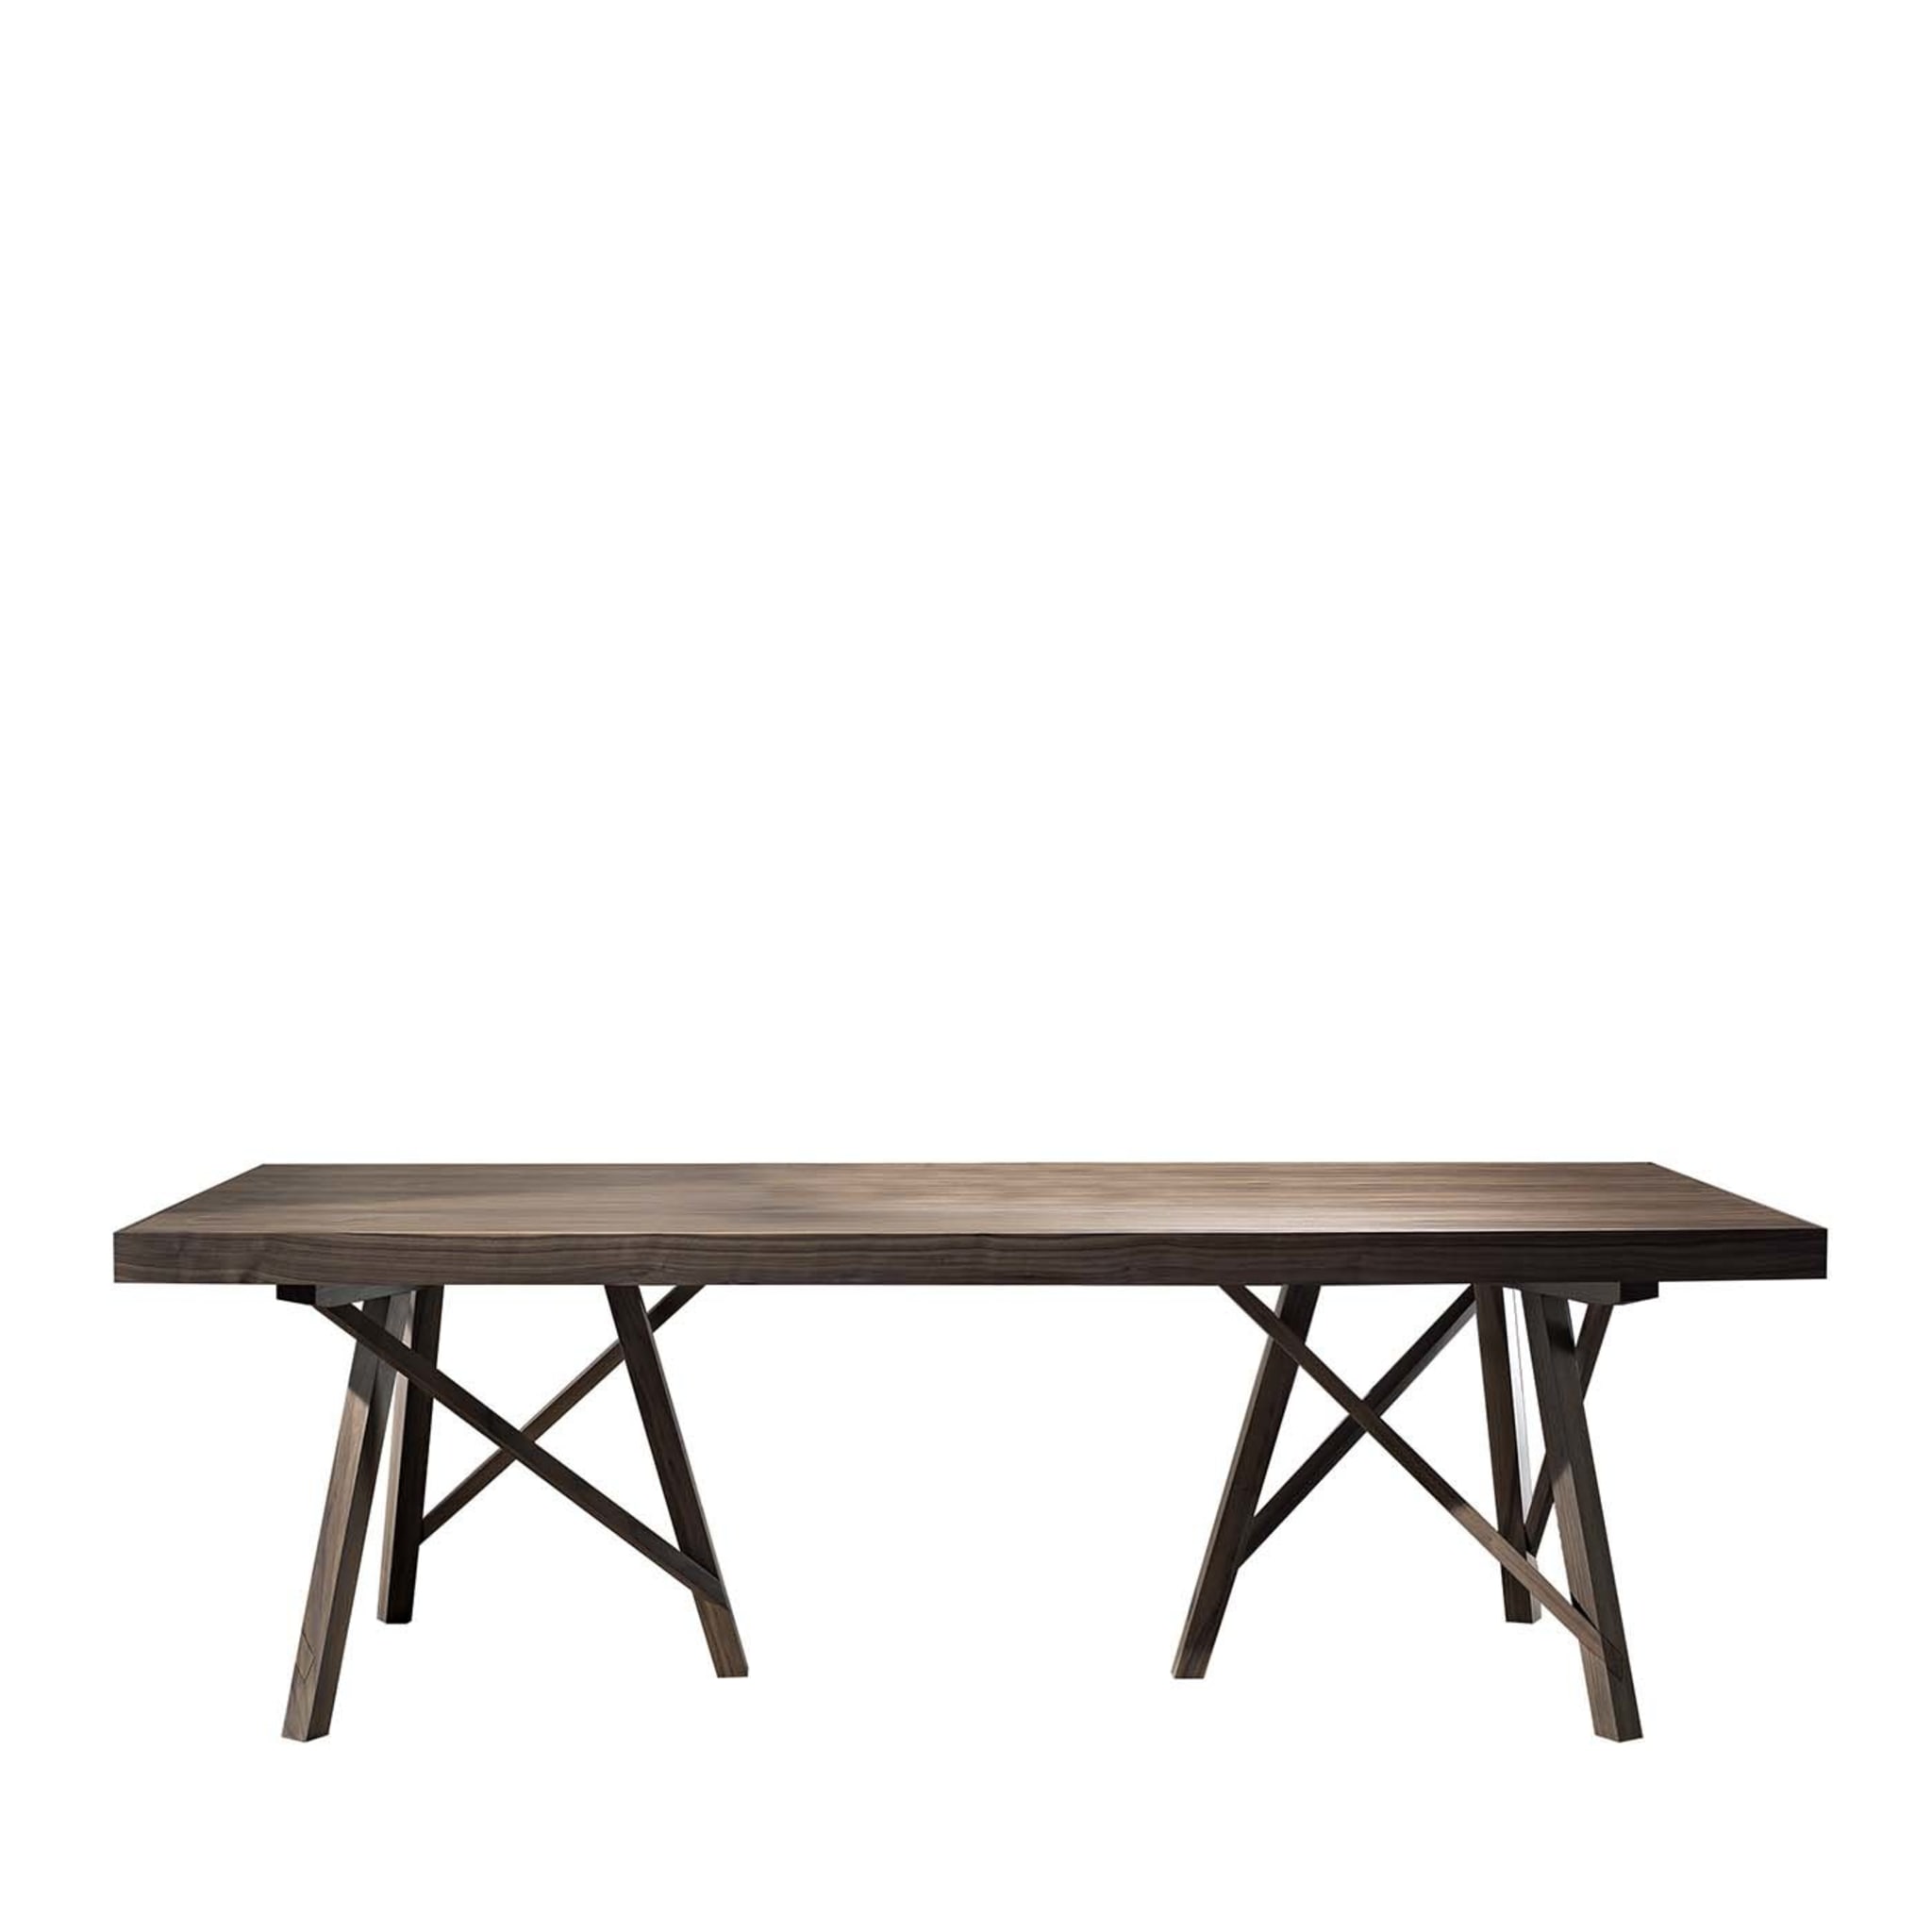 Zeus Extendable Dining Table by Giuliano and Gabriele Cappelletti - Main view